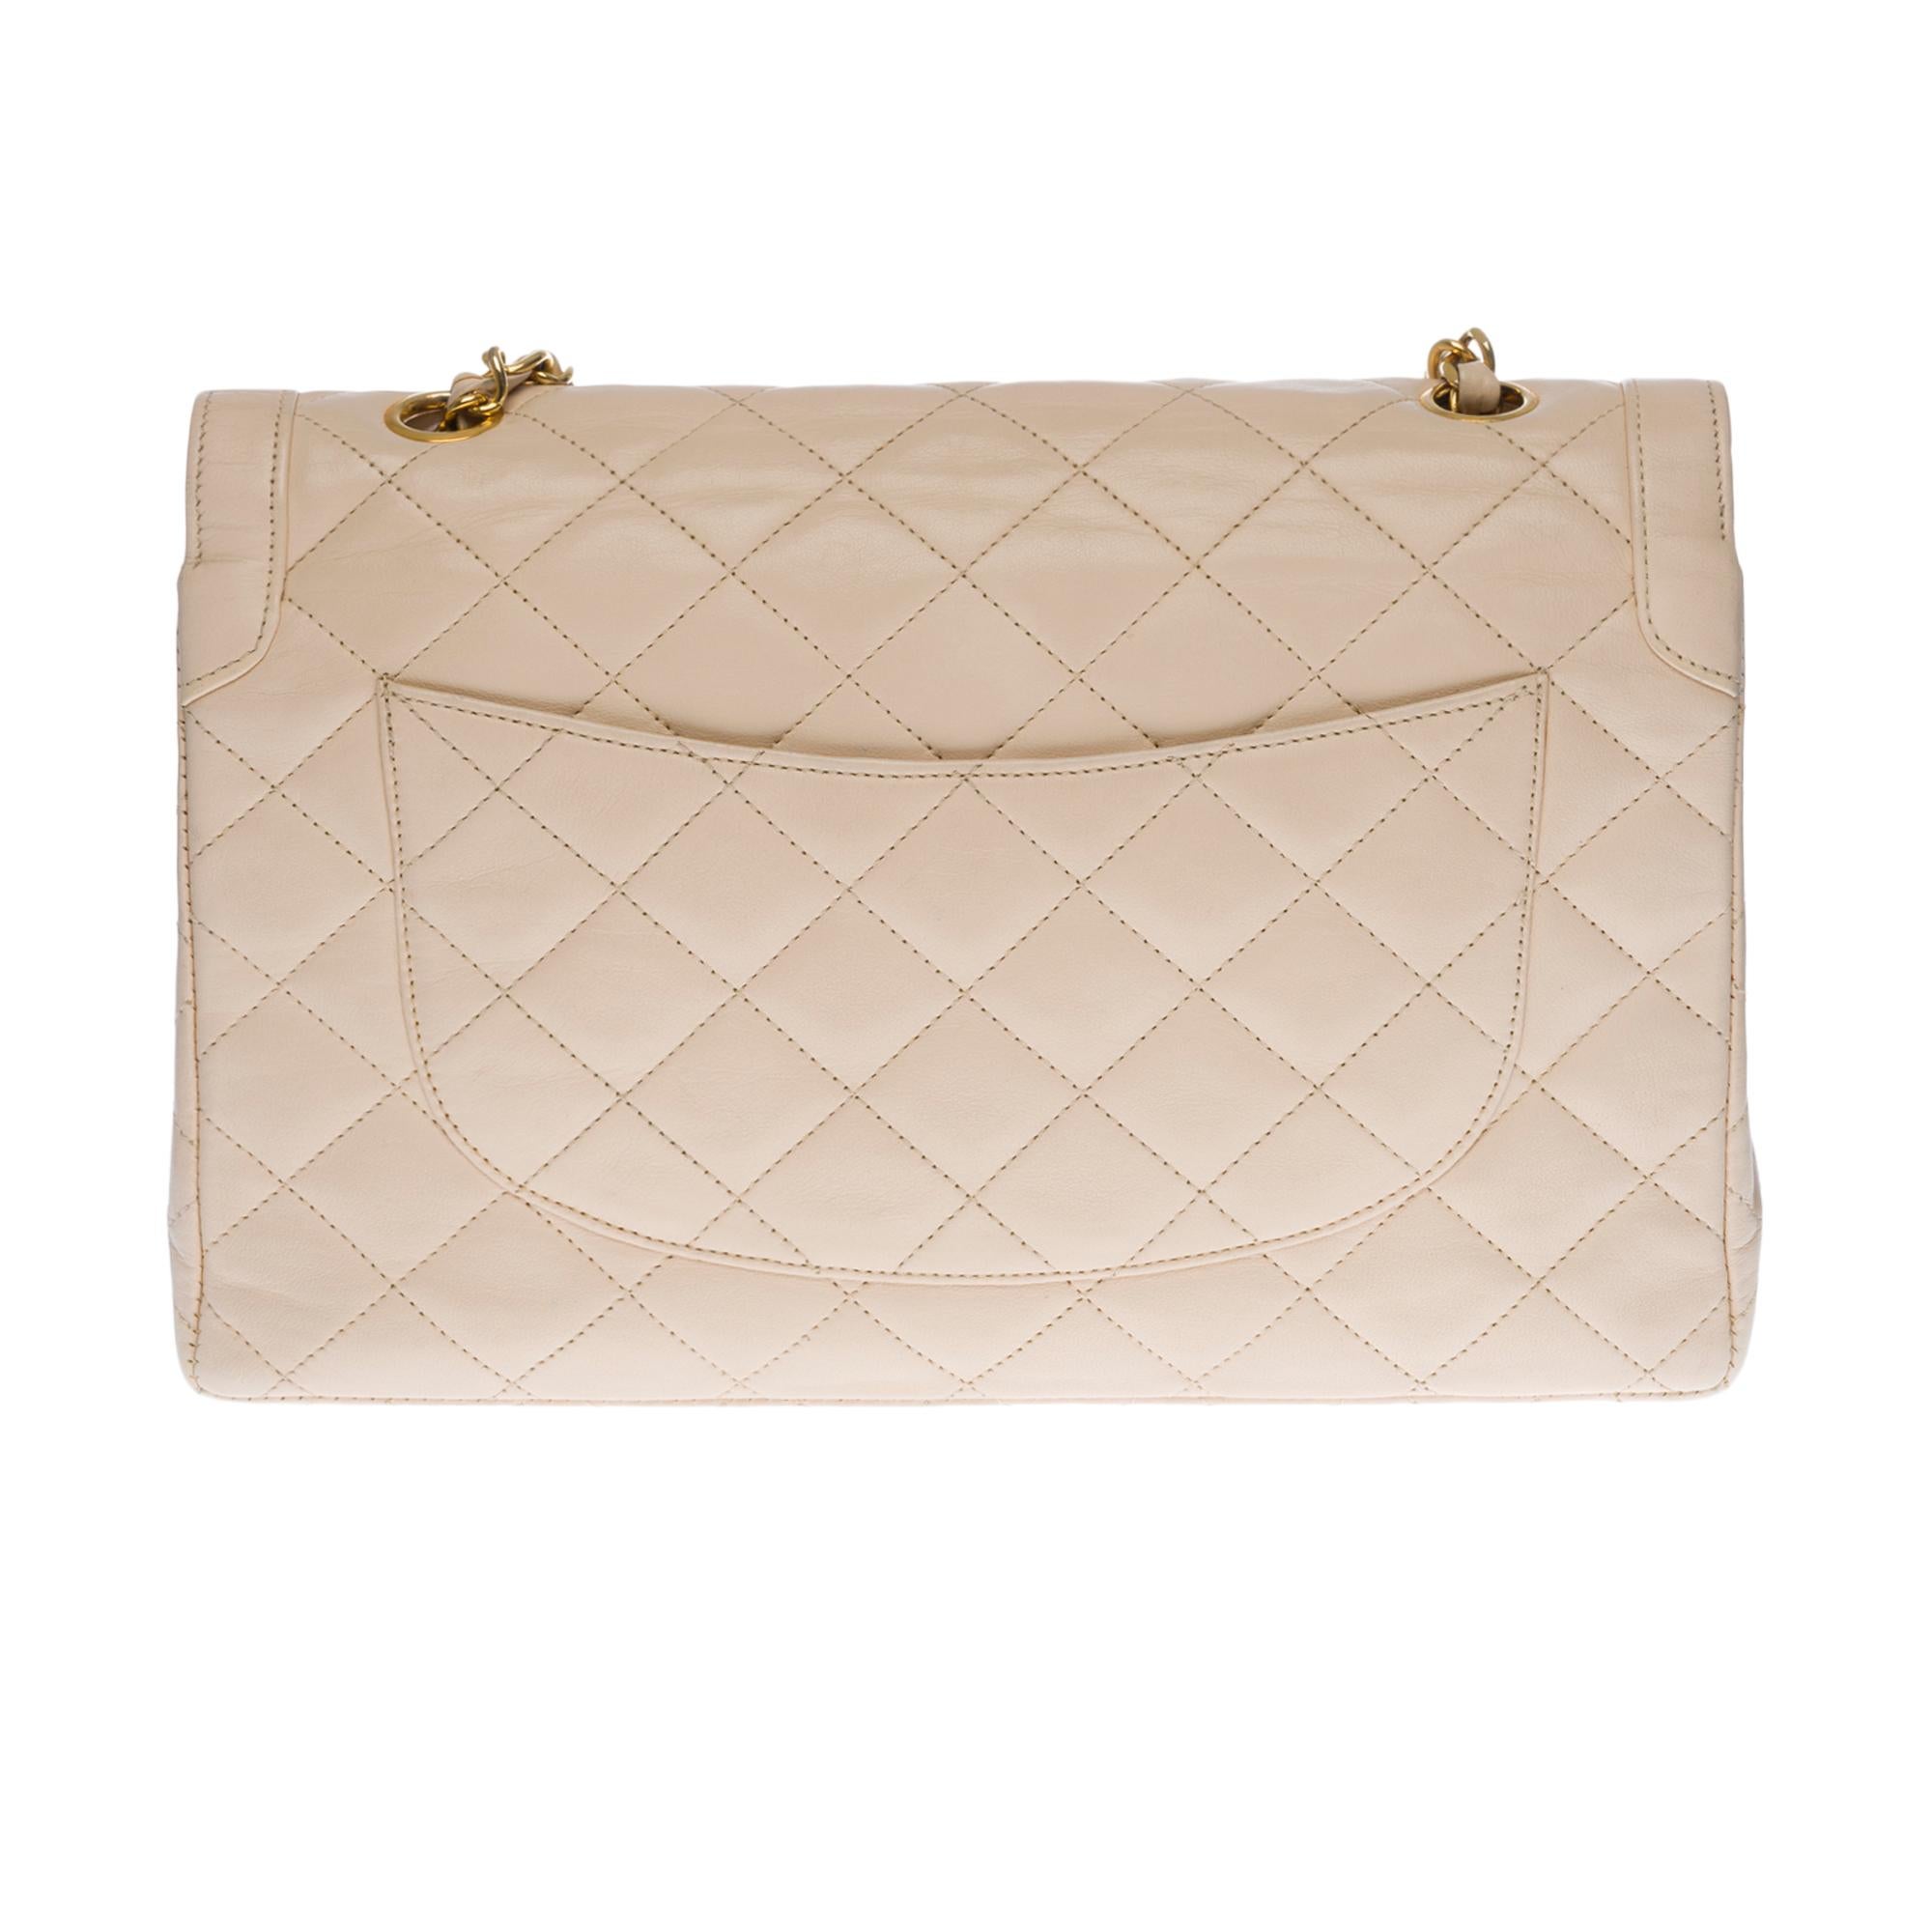 Very chic and Rare Chanel Classique double flap in beige quilted leather shoulder bag, gold metal hardware, a chain handle in gold metal intertwined with beige leather allowing a shoulder or shoulder strap.

Two-tone metal logo closure (gold and